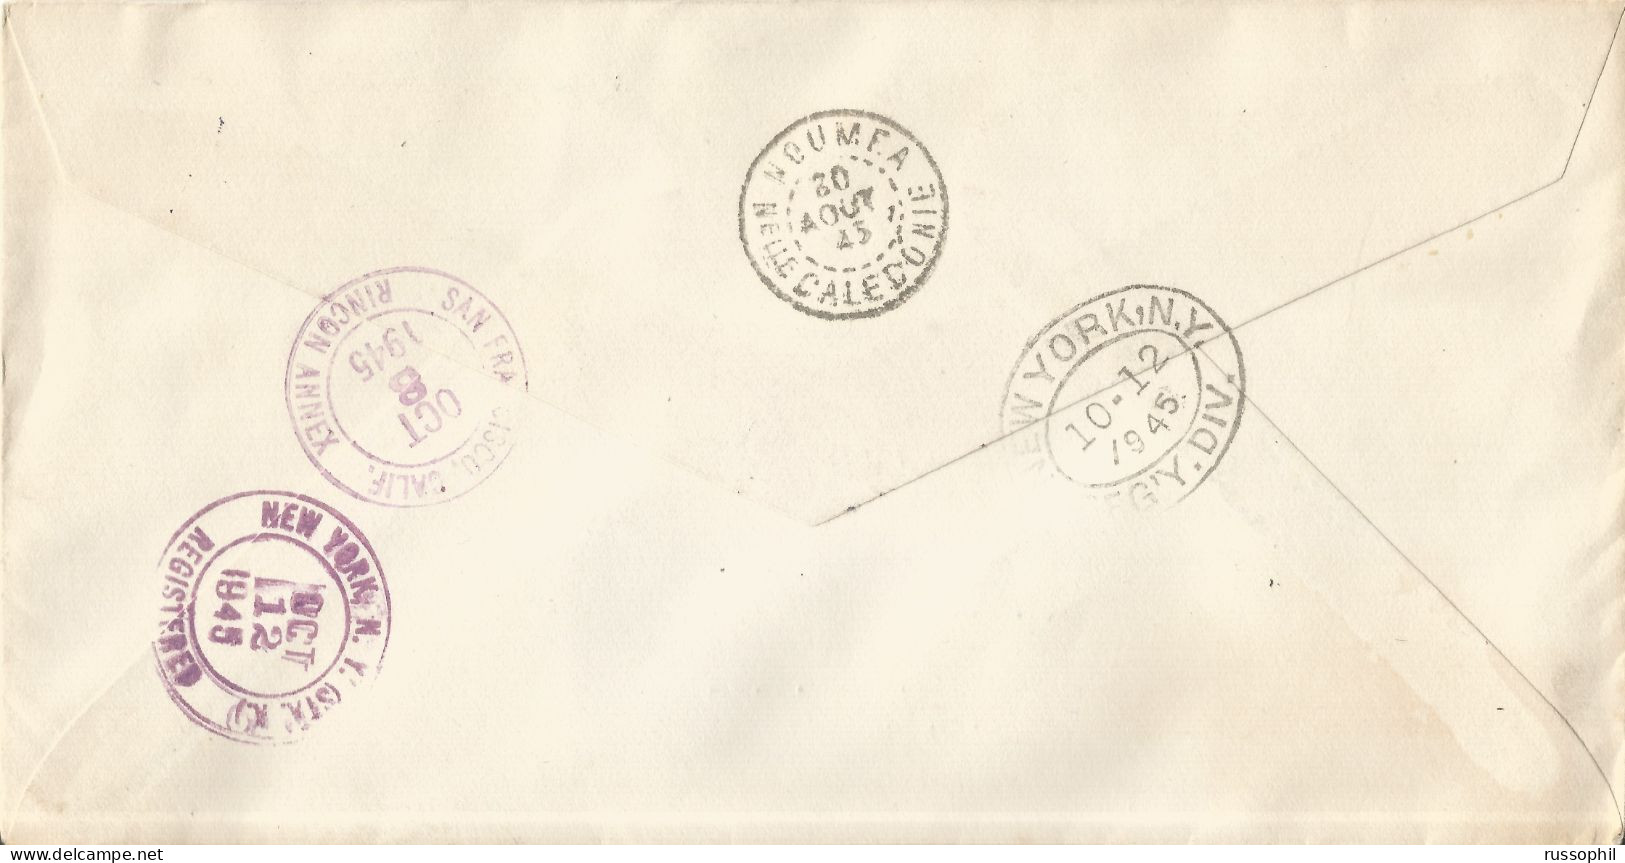 WALLIS AND FUTUNA - 7 STAMP 26 FR FRANKING "LONDON" ISSUE ON REGISTERED COVER TO THE USA - 1945 - Briefe U. Dokumente